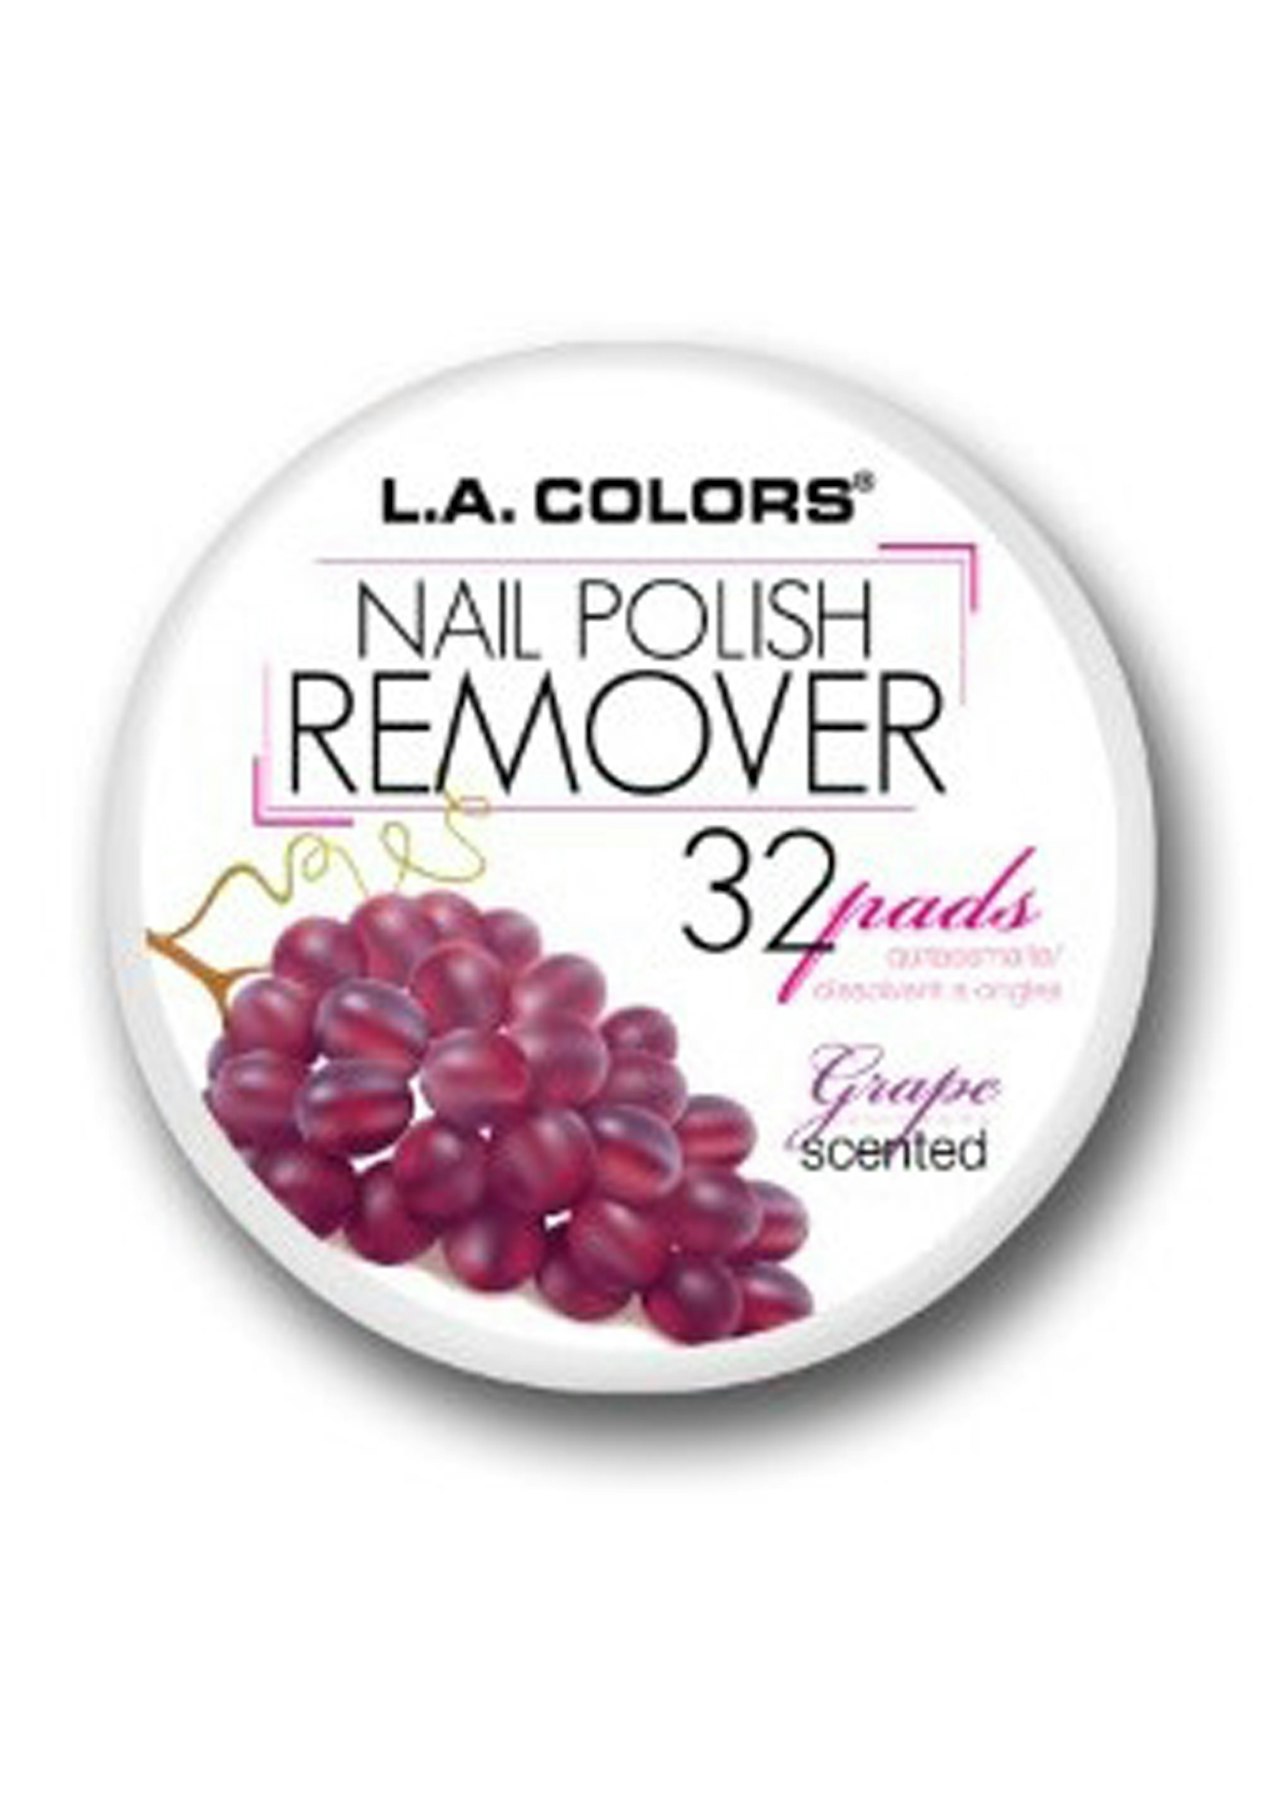 La Colors Nail Polish Remover Pads Grape Under 20 Effy Moom Free Coloring Picture wallpaper give a chance to color on the wall without getting in trouble! Fill the walls of your home or office with stress-relieving [effymoom.blogspot.com]